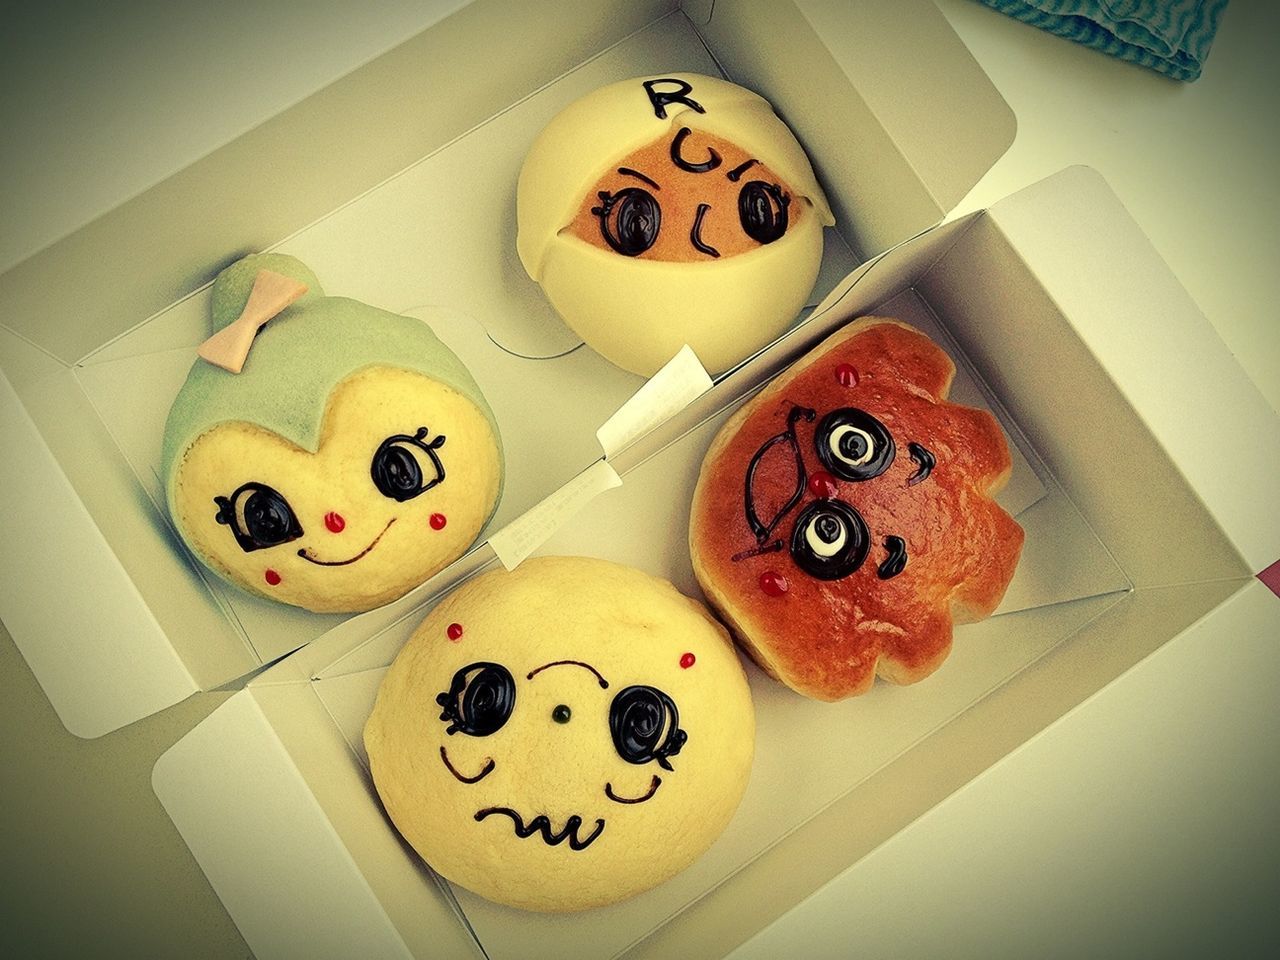 Cakes with faces